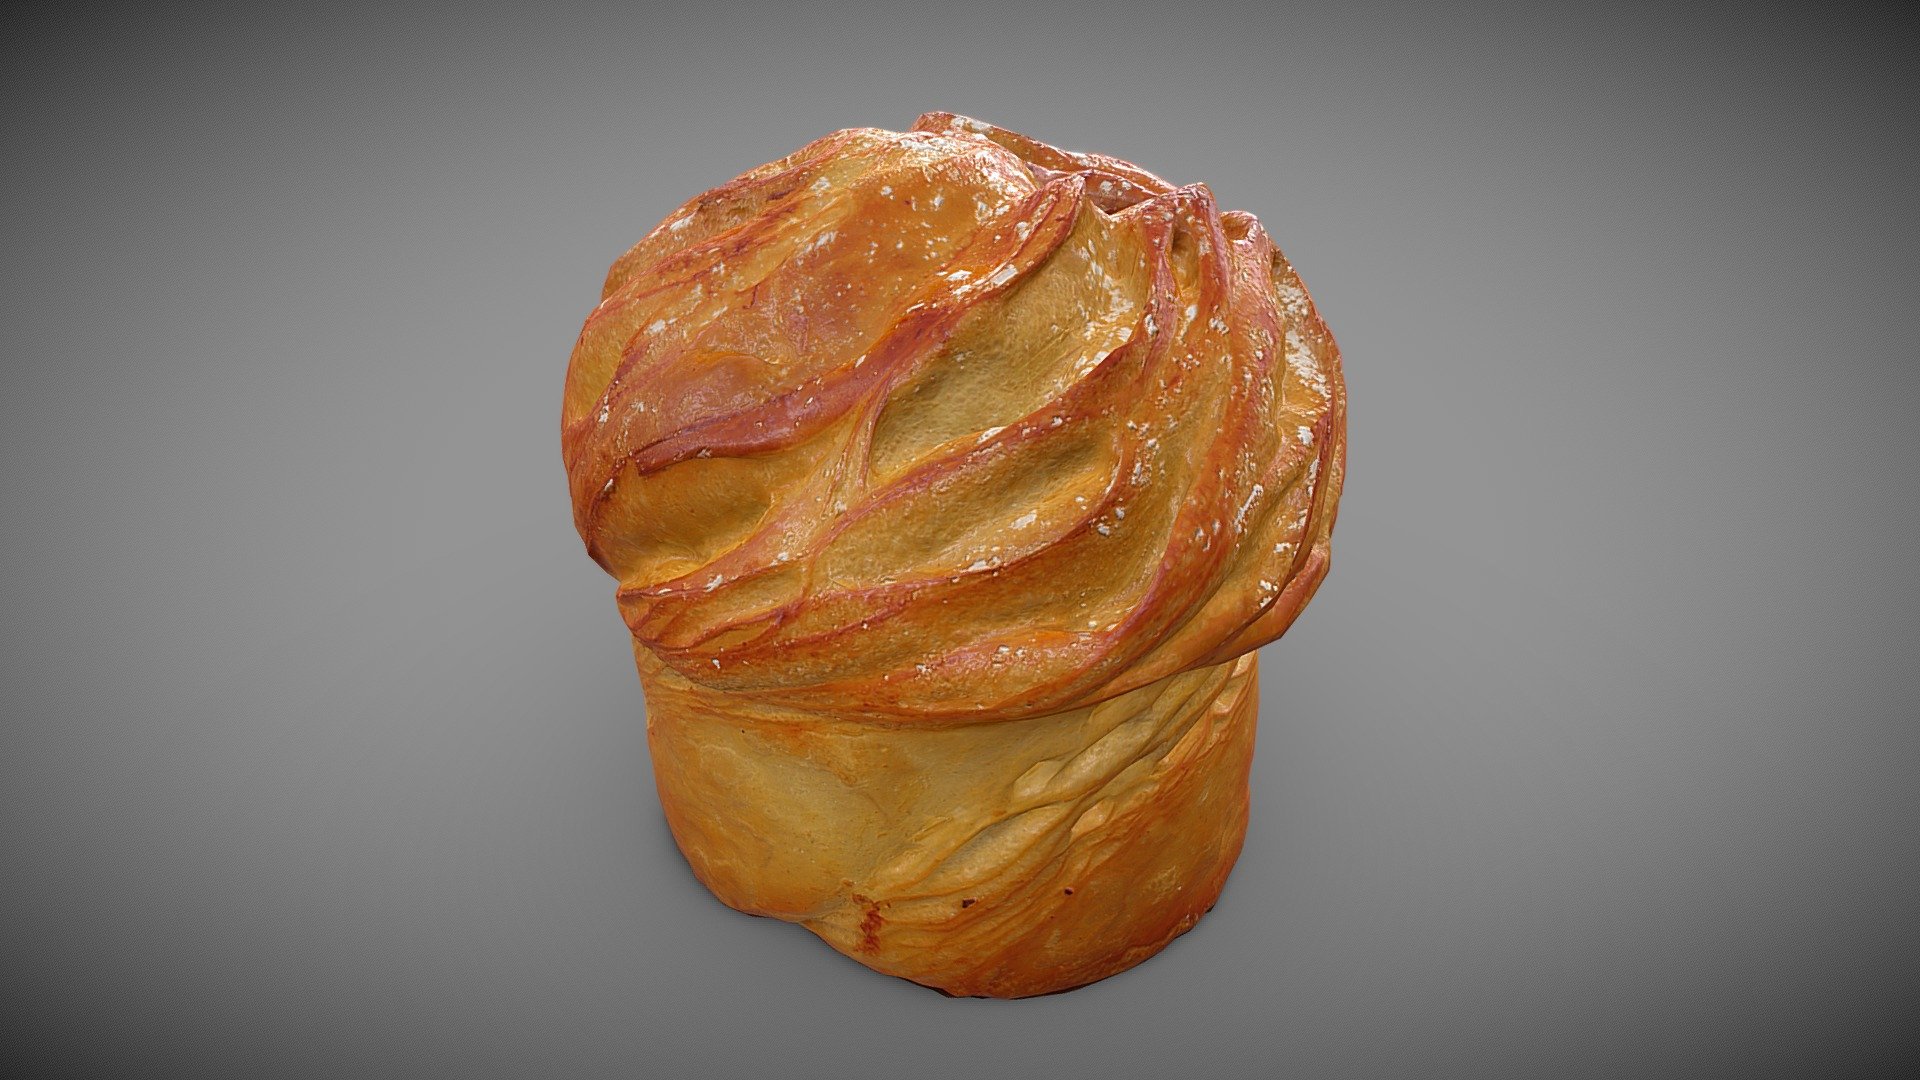 Also available in this pack 7 pastries with a 57% discount

Made with Metashape, Blender and Subtance painter

Photos taken with a “Sony A7II + 105mm f/2.8 DG DN Macro Art